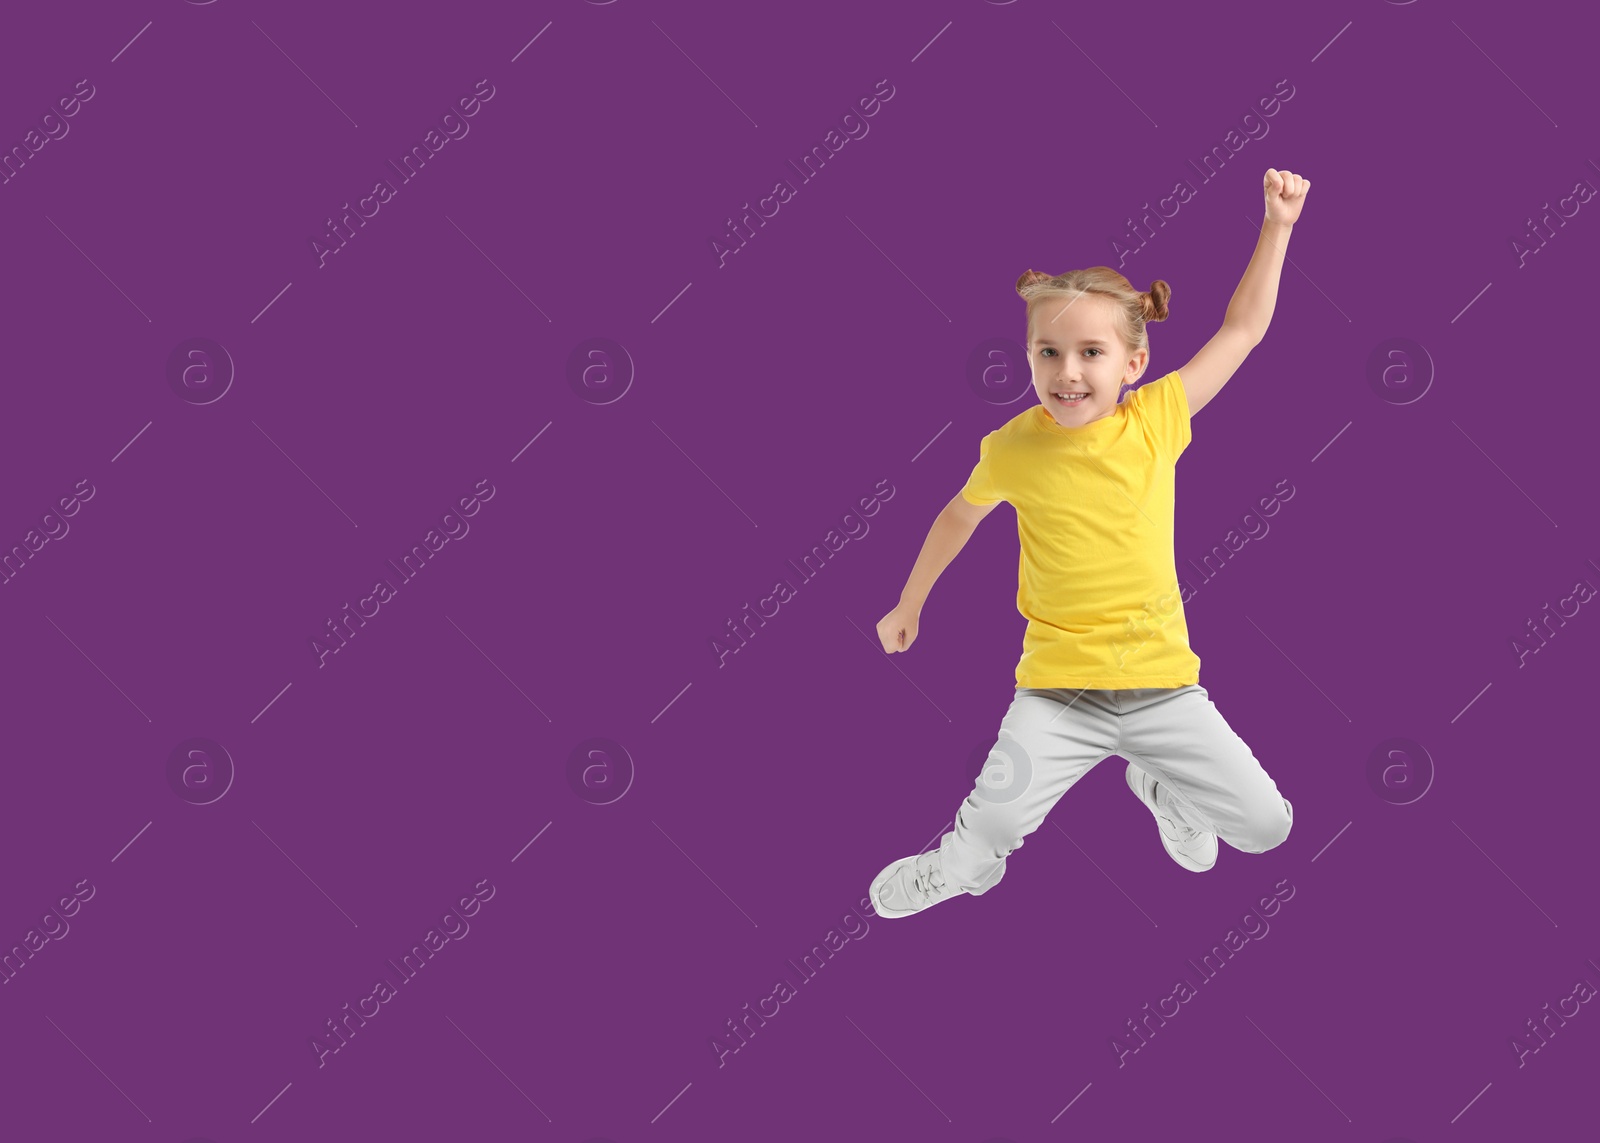 Image of Cute girl jumping on purple background, space for text